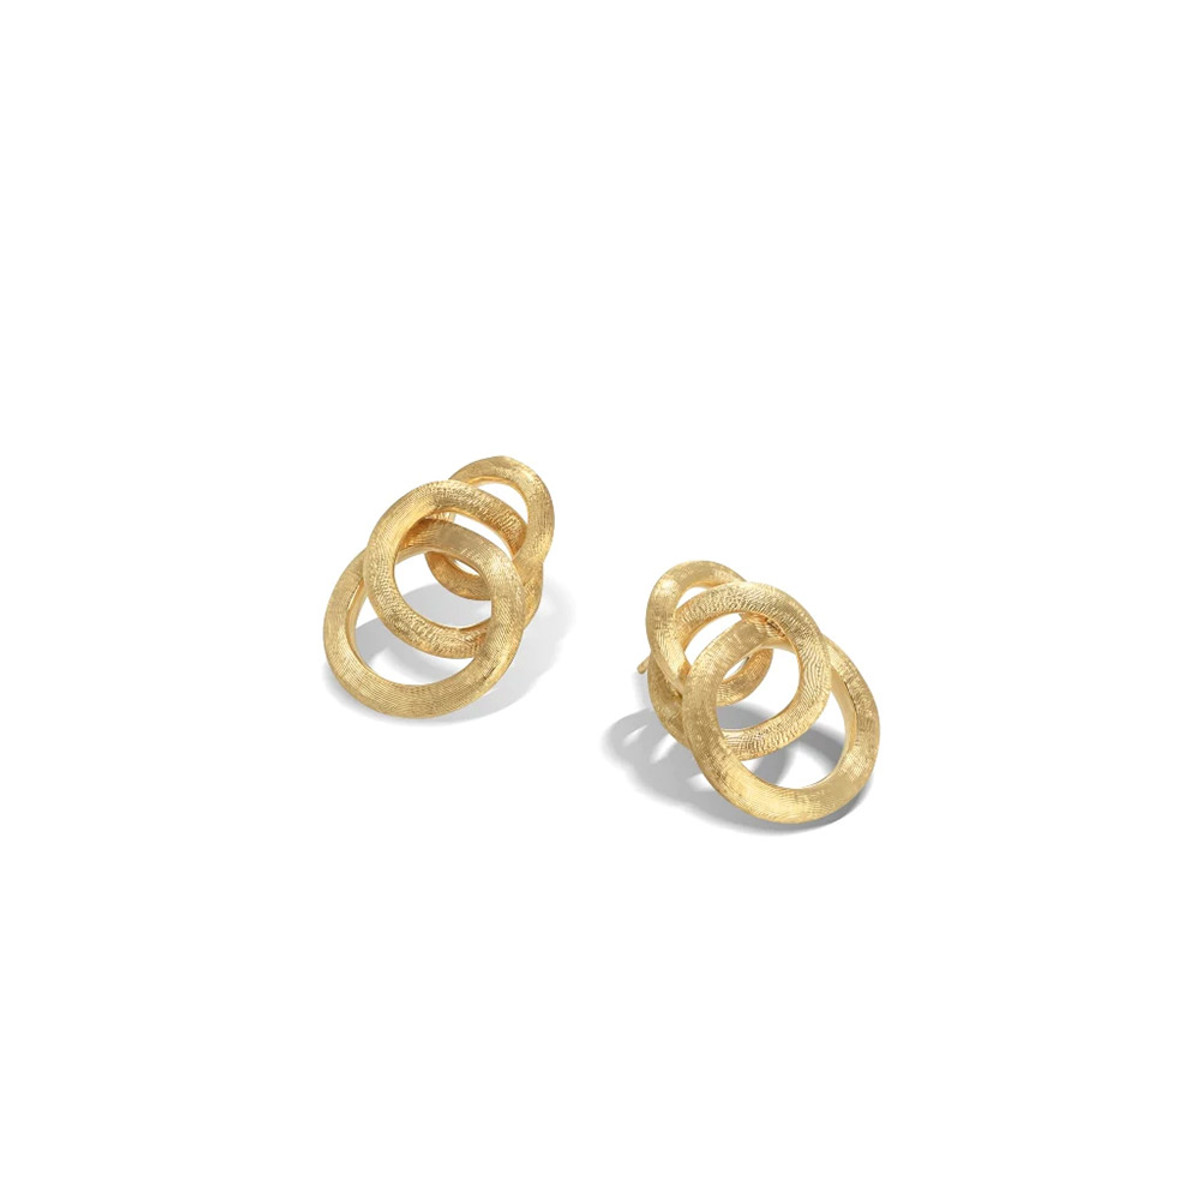 Marco Bicego Jaipur Collection 18K Yellow Gold Small Knot Earrings-47724